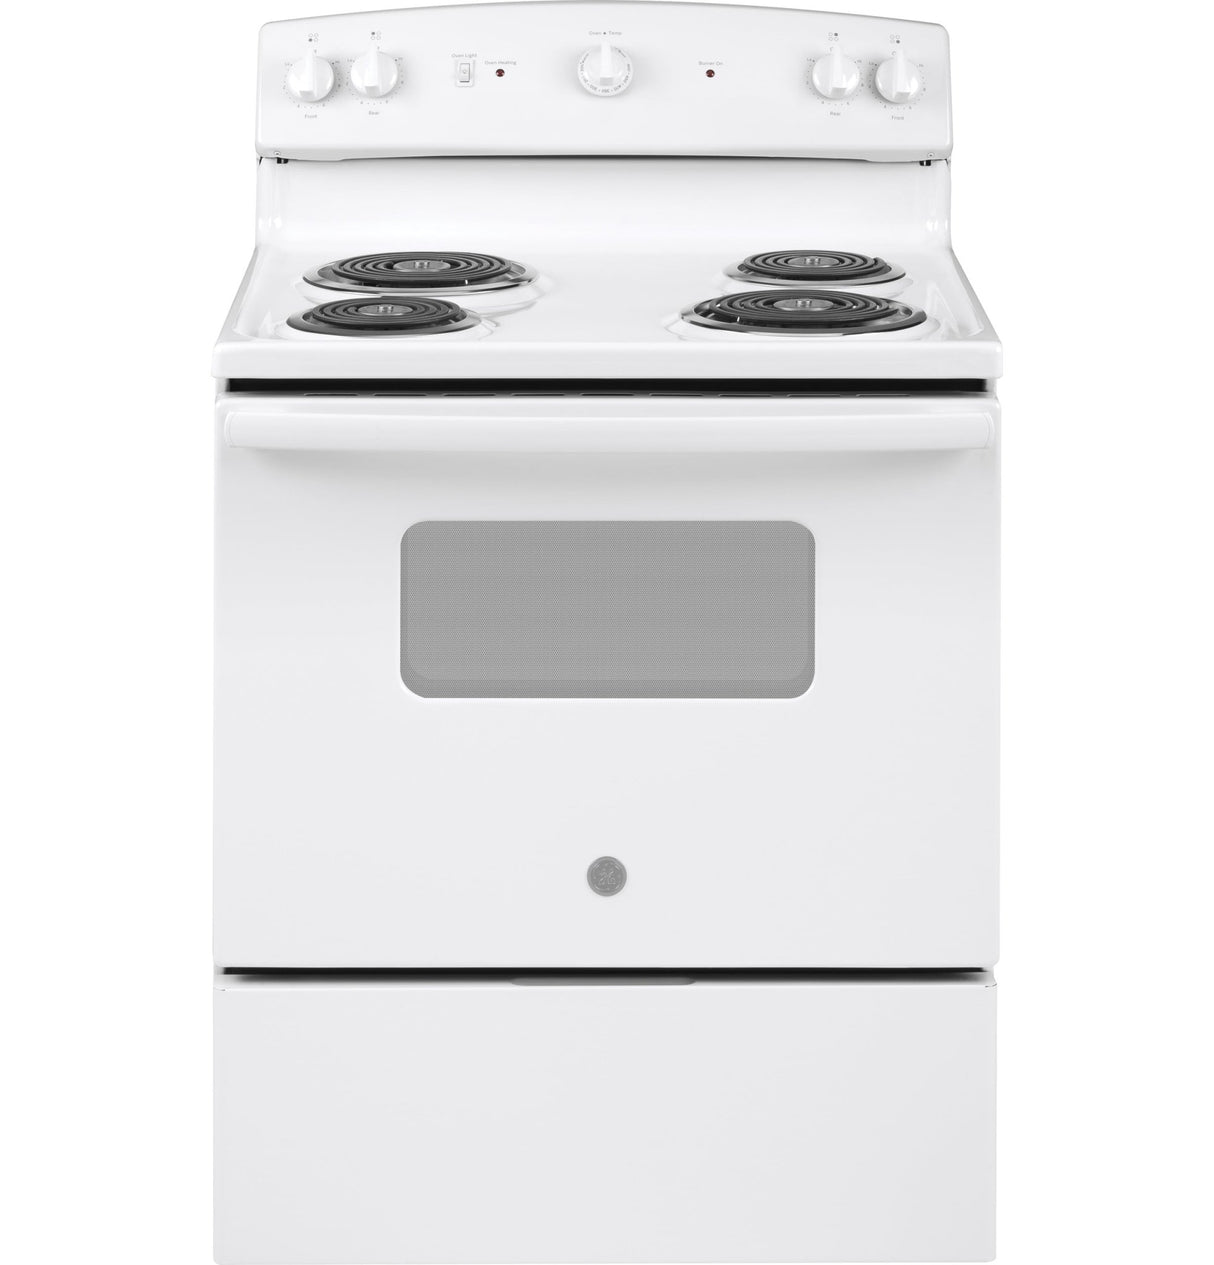 GE 30-in 4 Elements 5-cu ft Freestanding Electric Range (White)